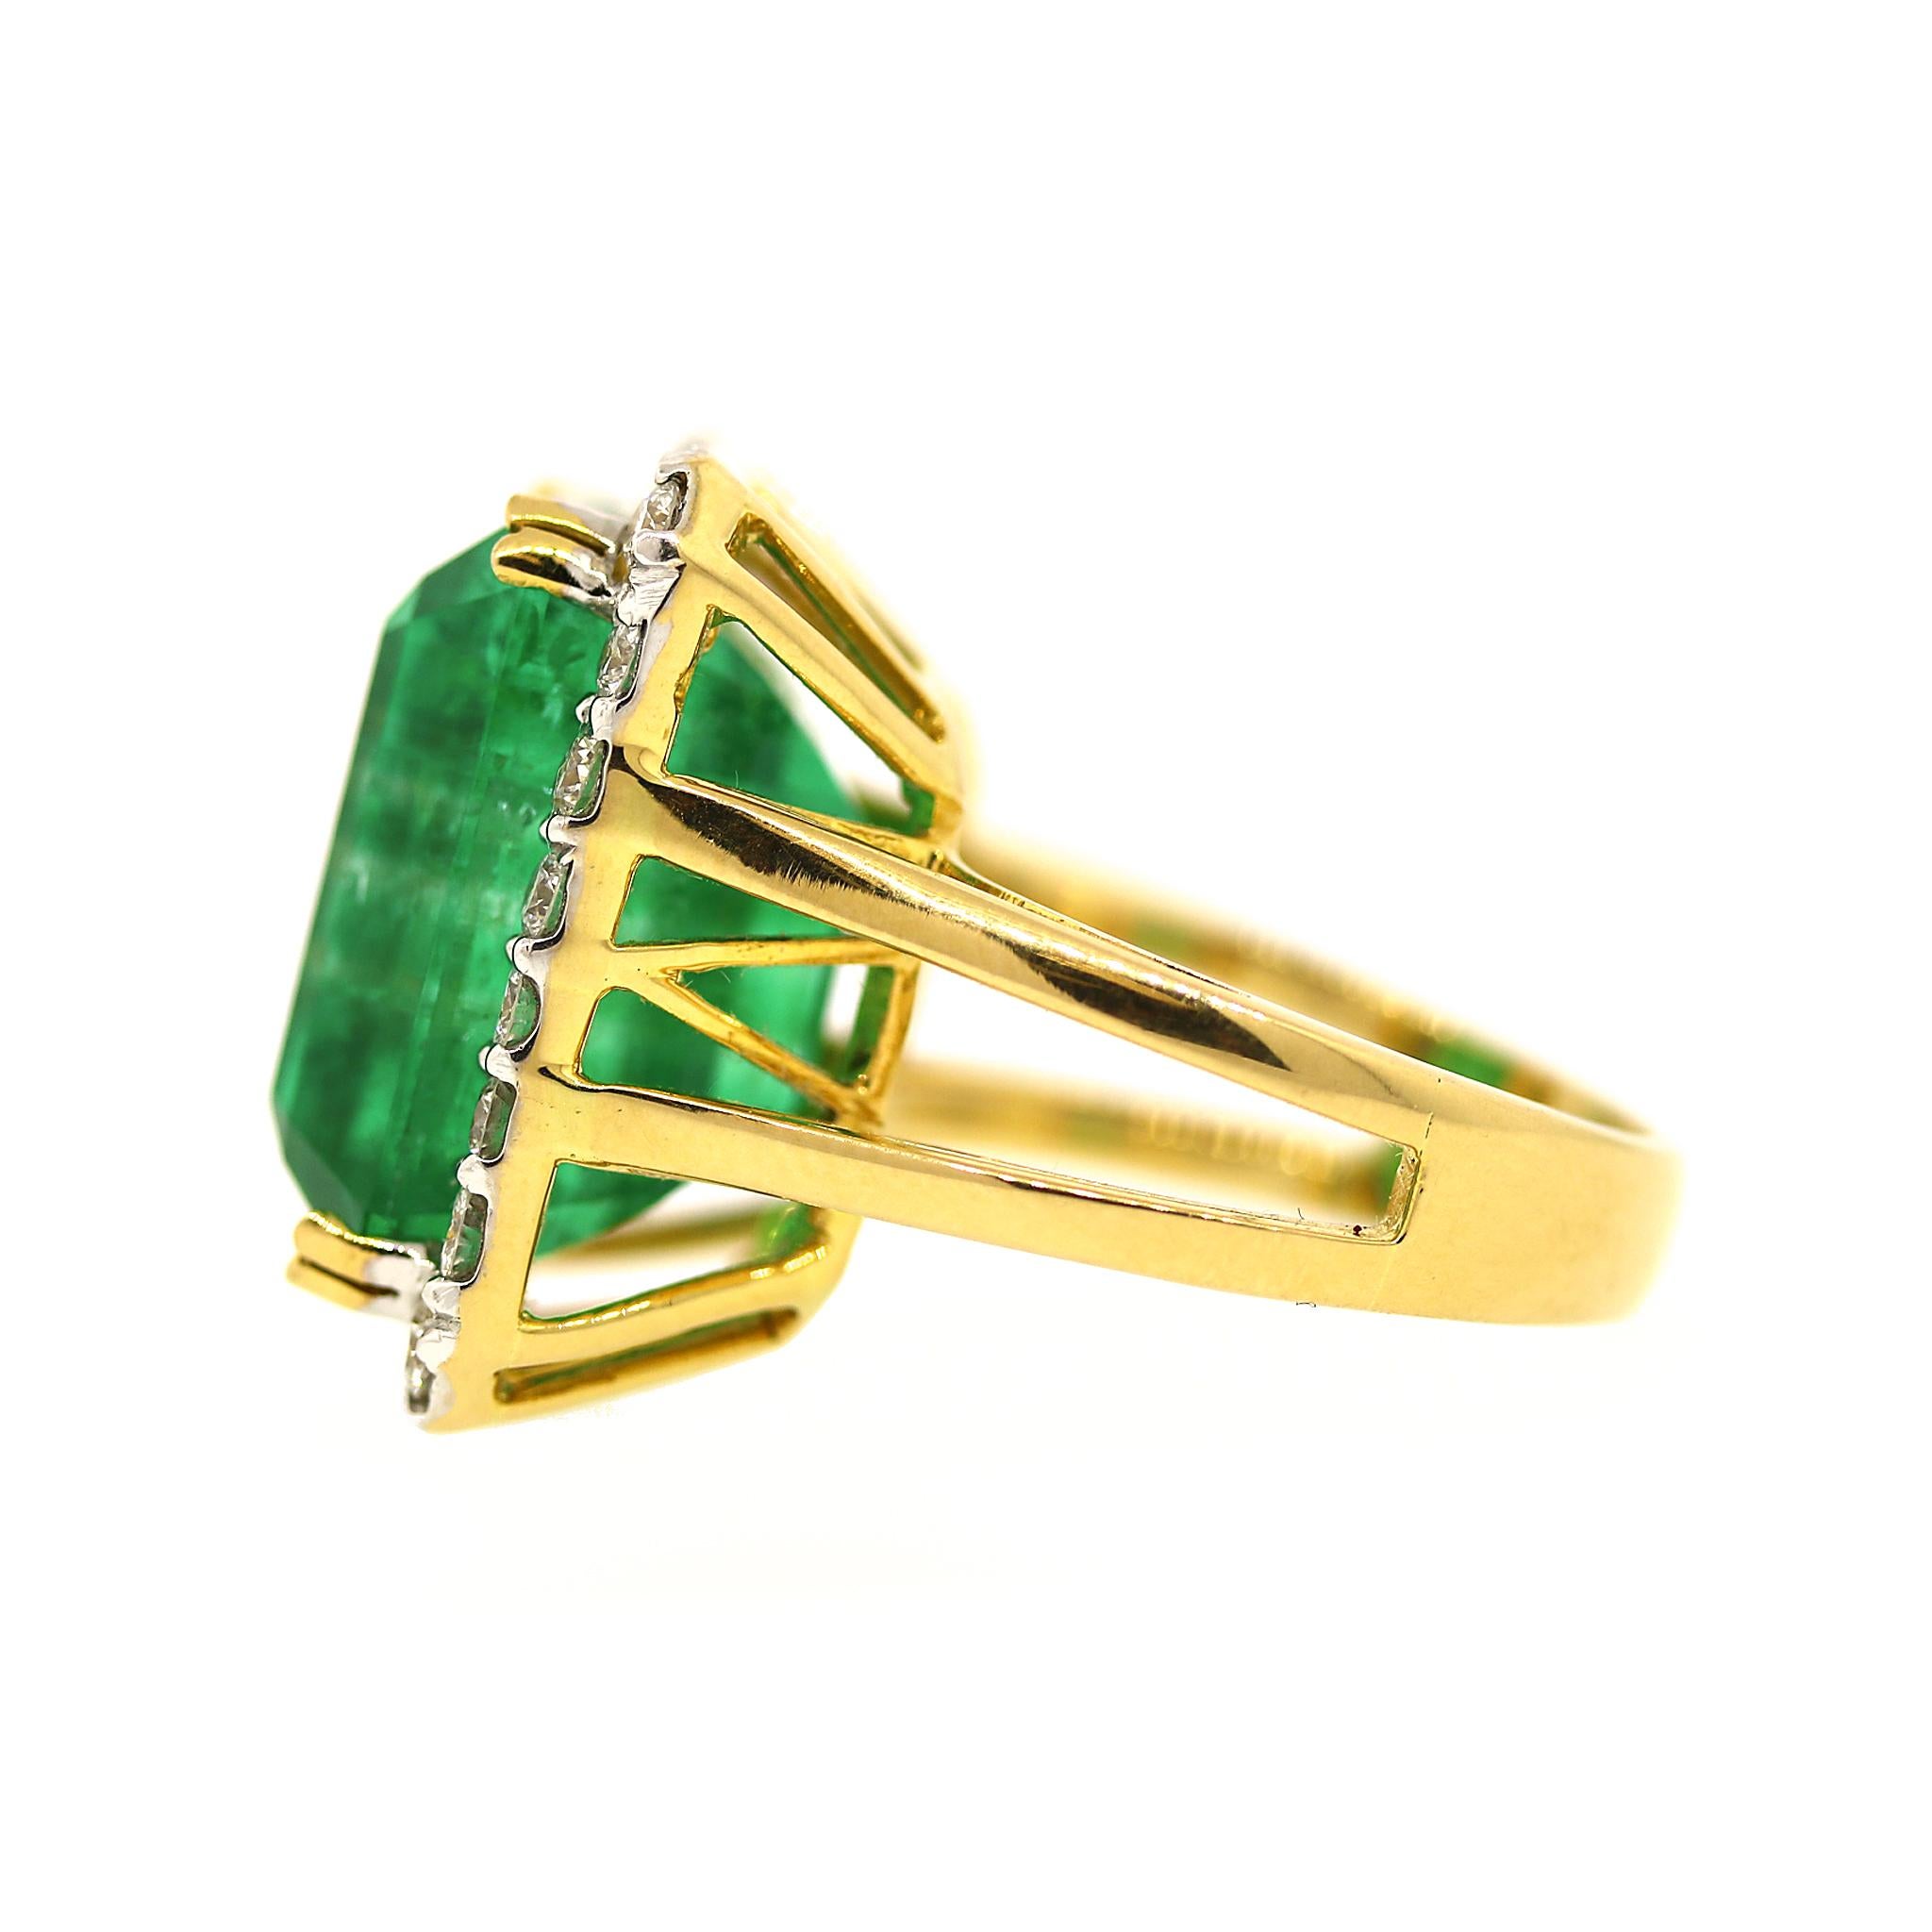 AGL Document No. 1127563
Natural Emerald
Carat Weight: 21.17 tcw
Emerald Cut
Origin: Afghanistan
Set in Yellow Gold with Diamond surrounds